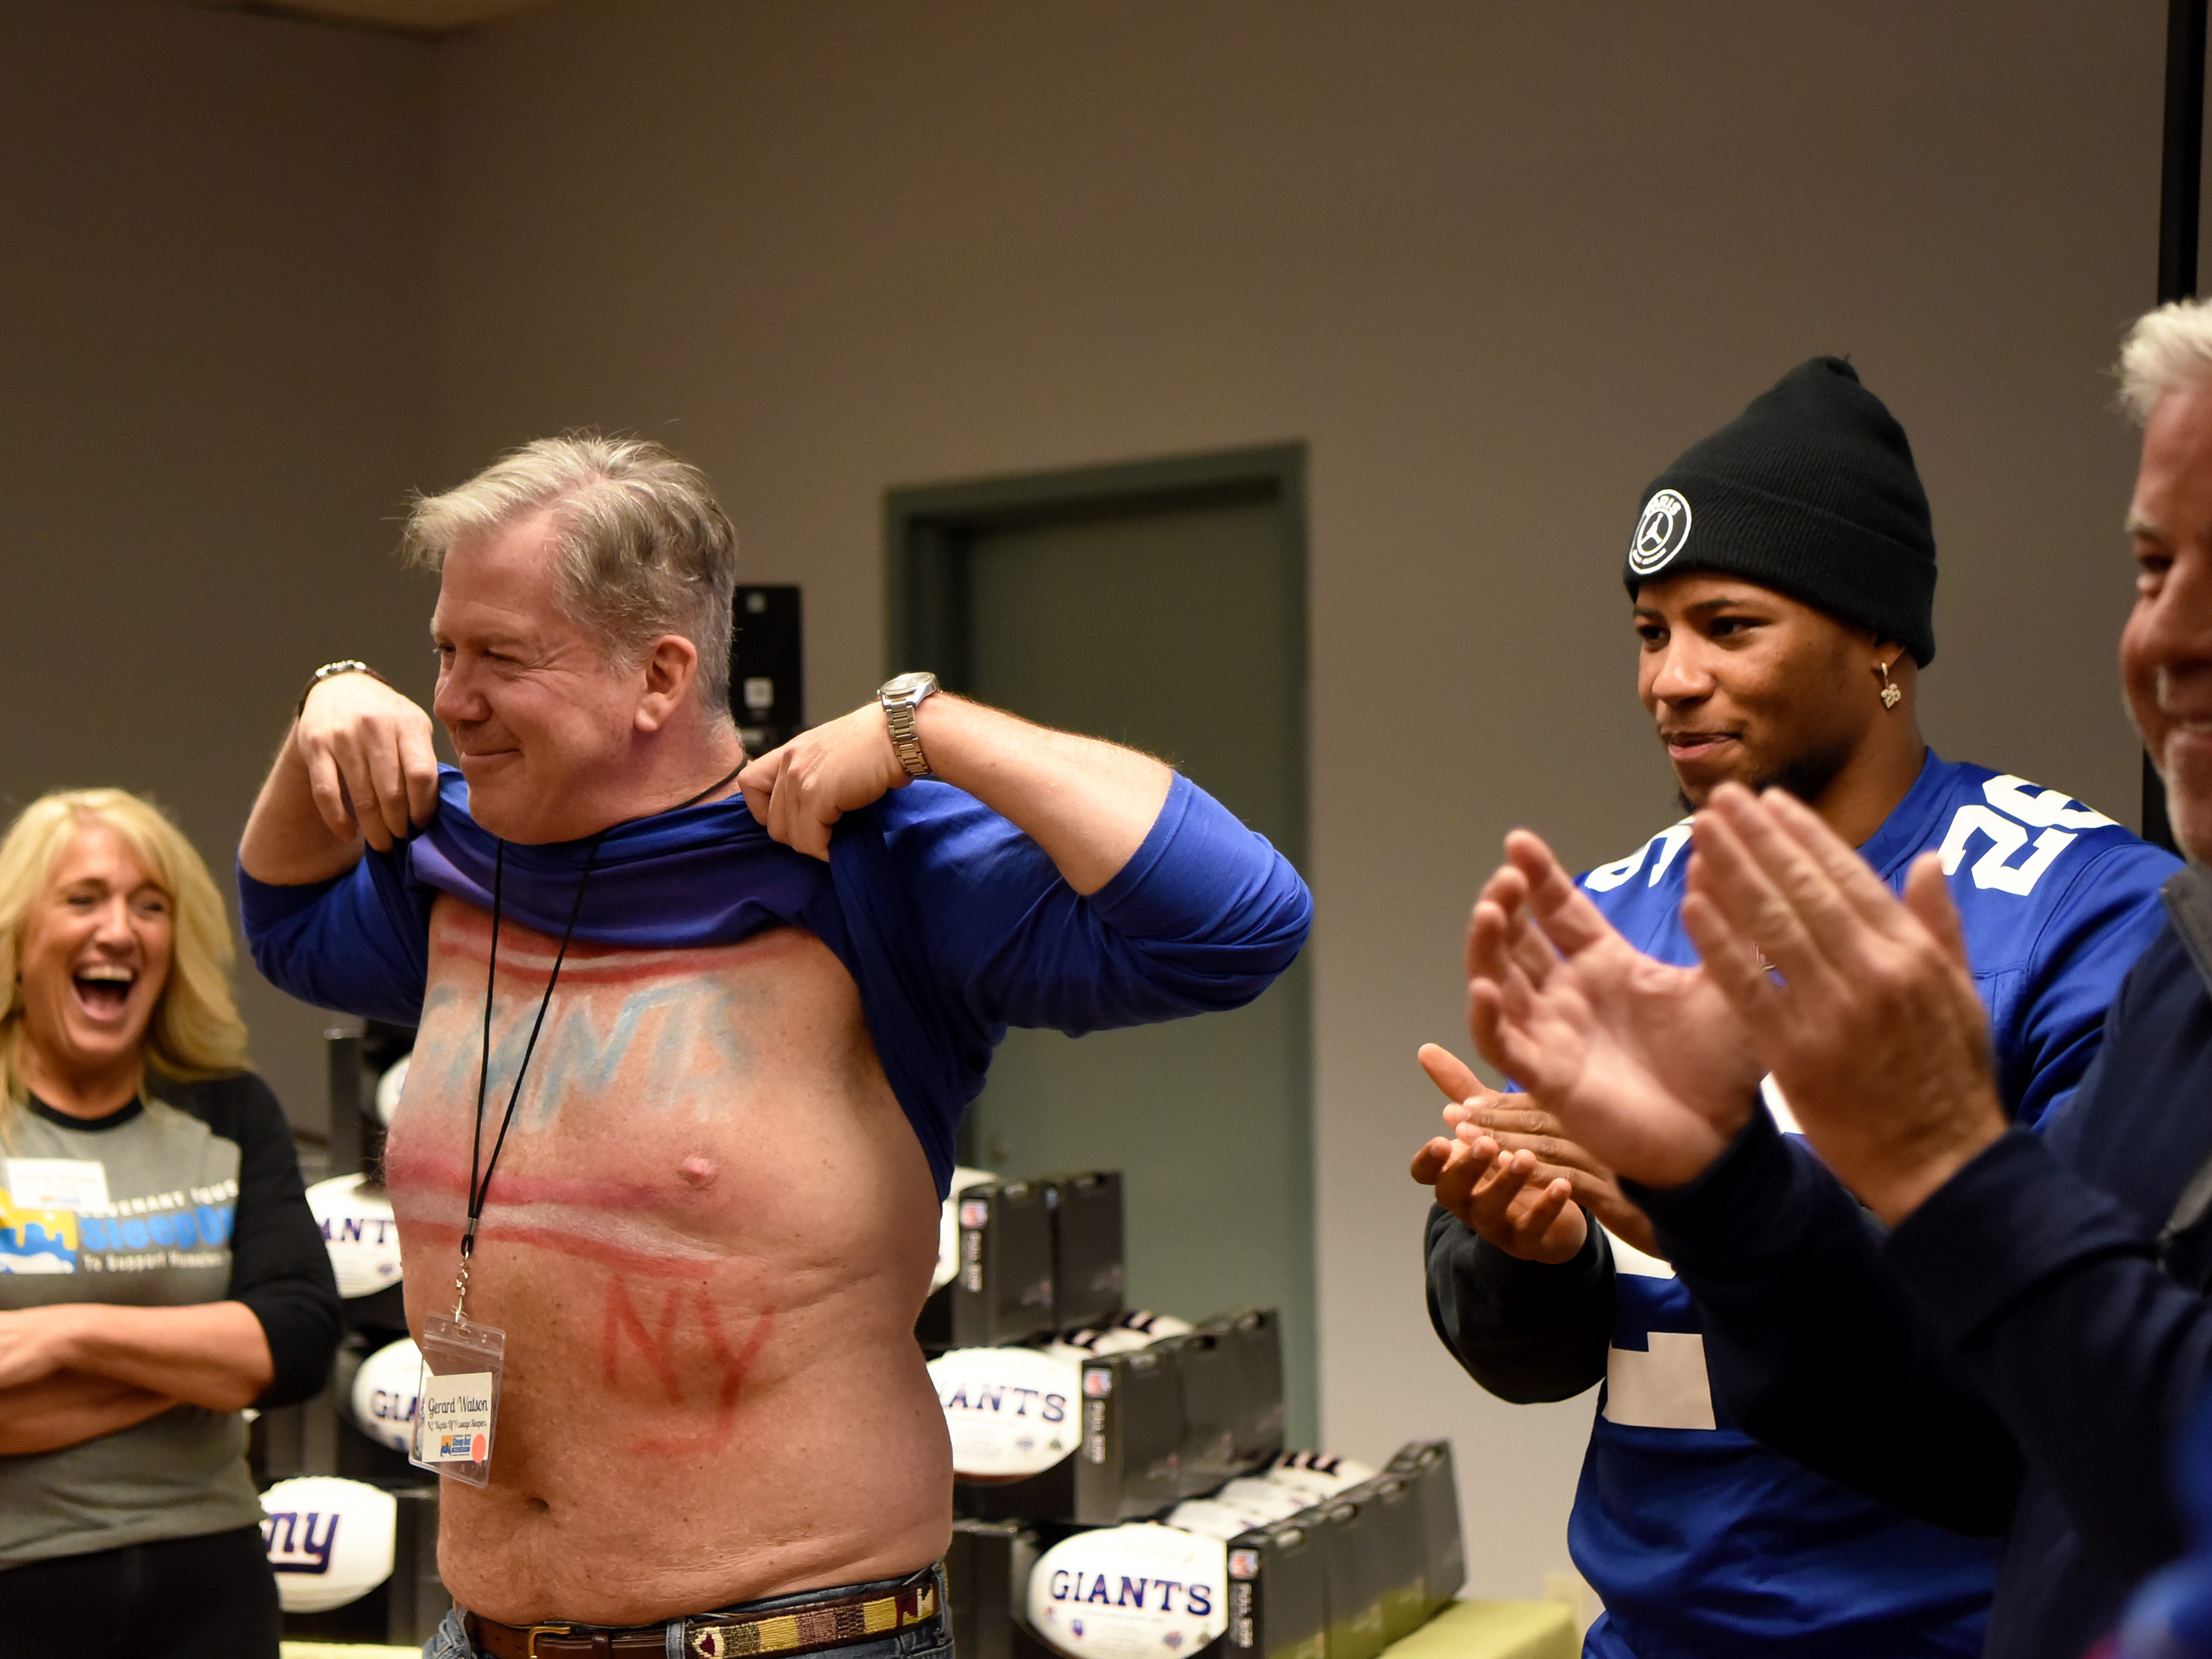 Covenant House holds a Sleep Out Executive Edition in Newark on Thursday November 21, 2019. (From left) Janette Scrozzo laughs, Gerard Watson lifts his shirt as Saquon Barkley and Jim White applaud. 